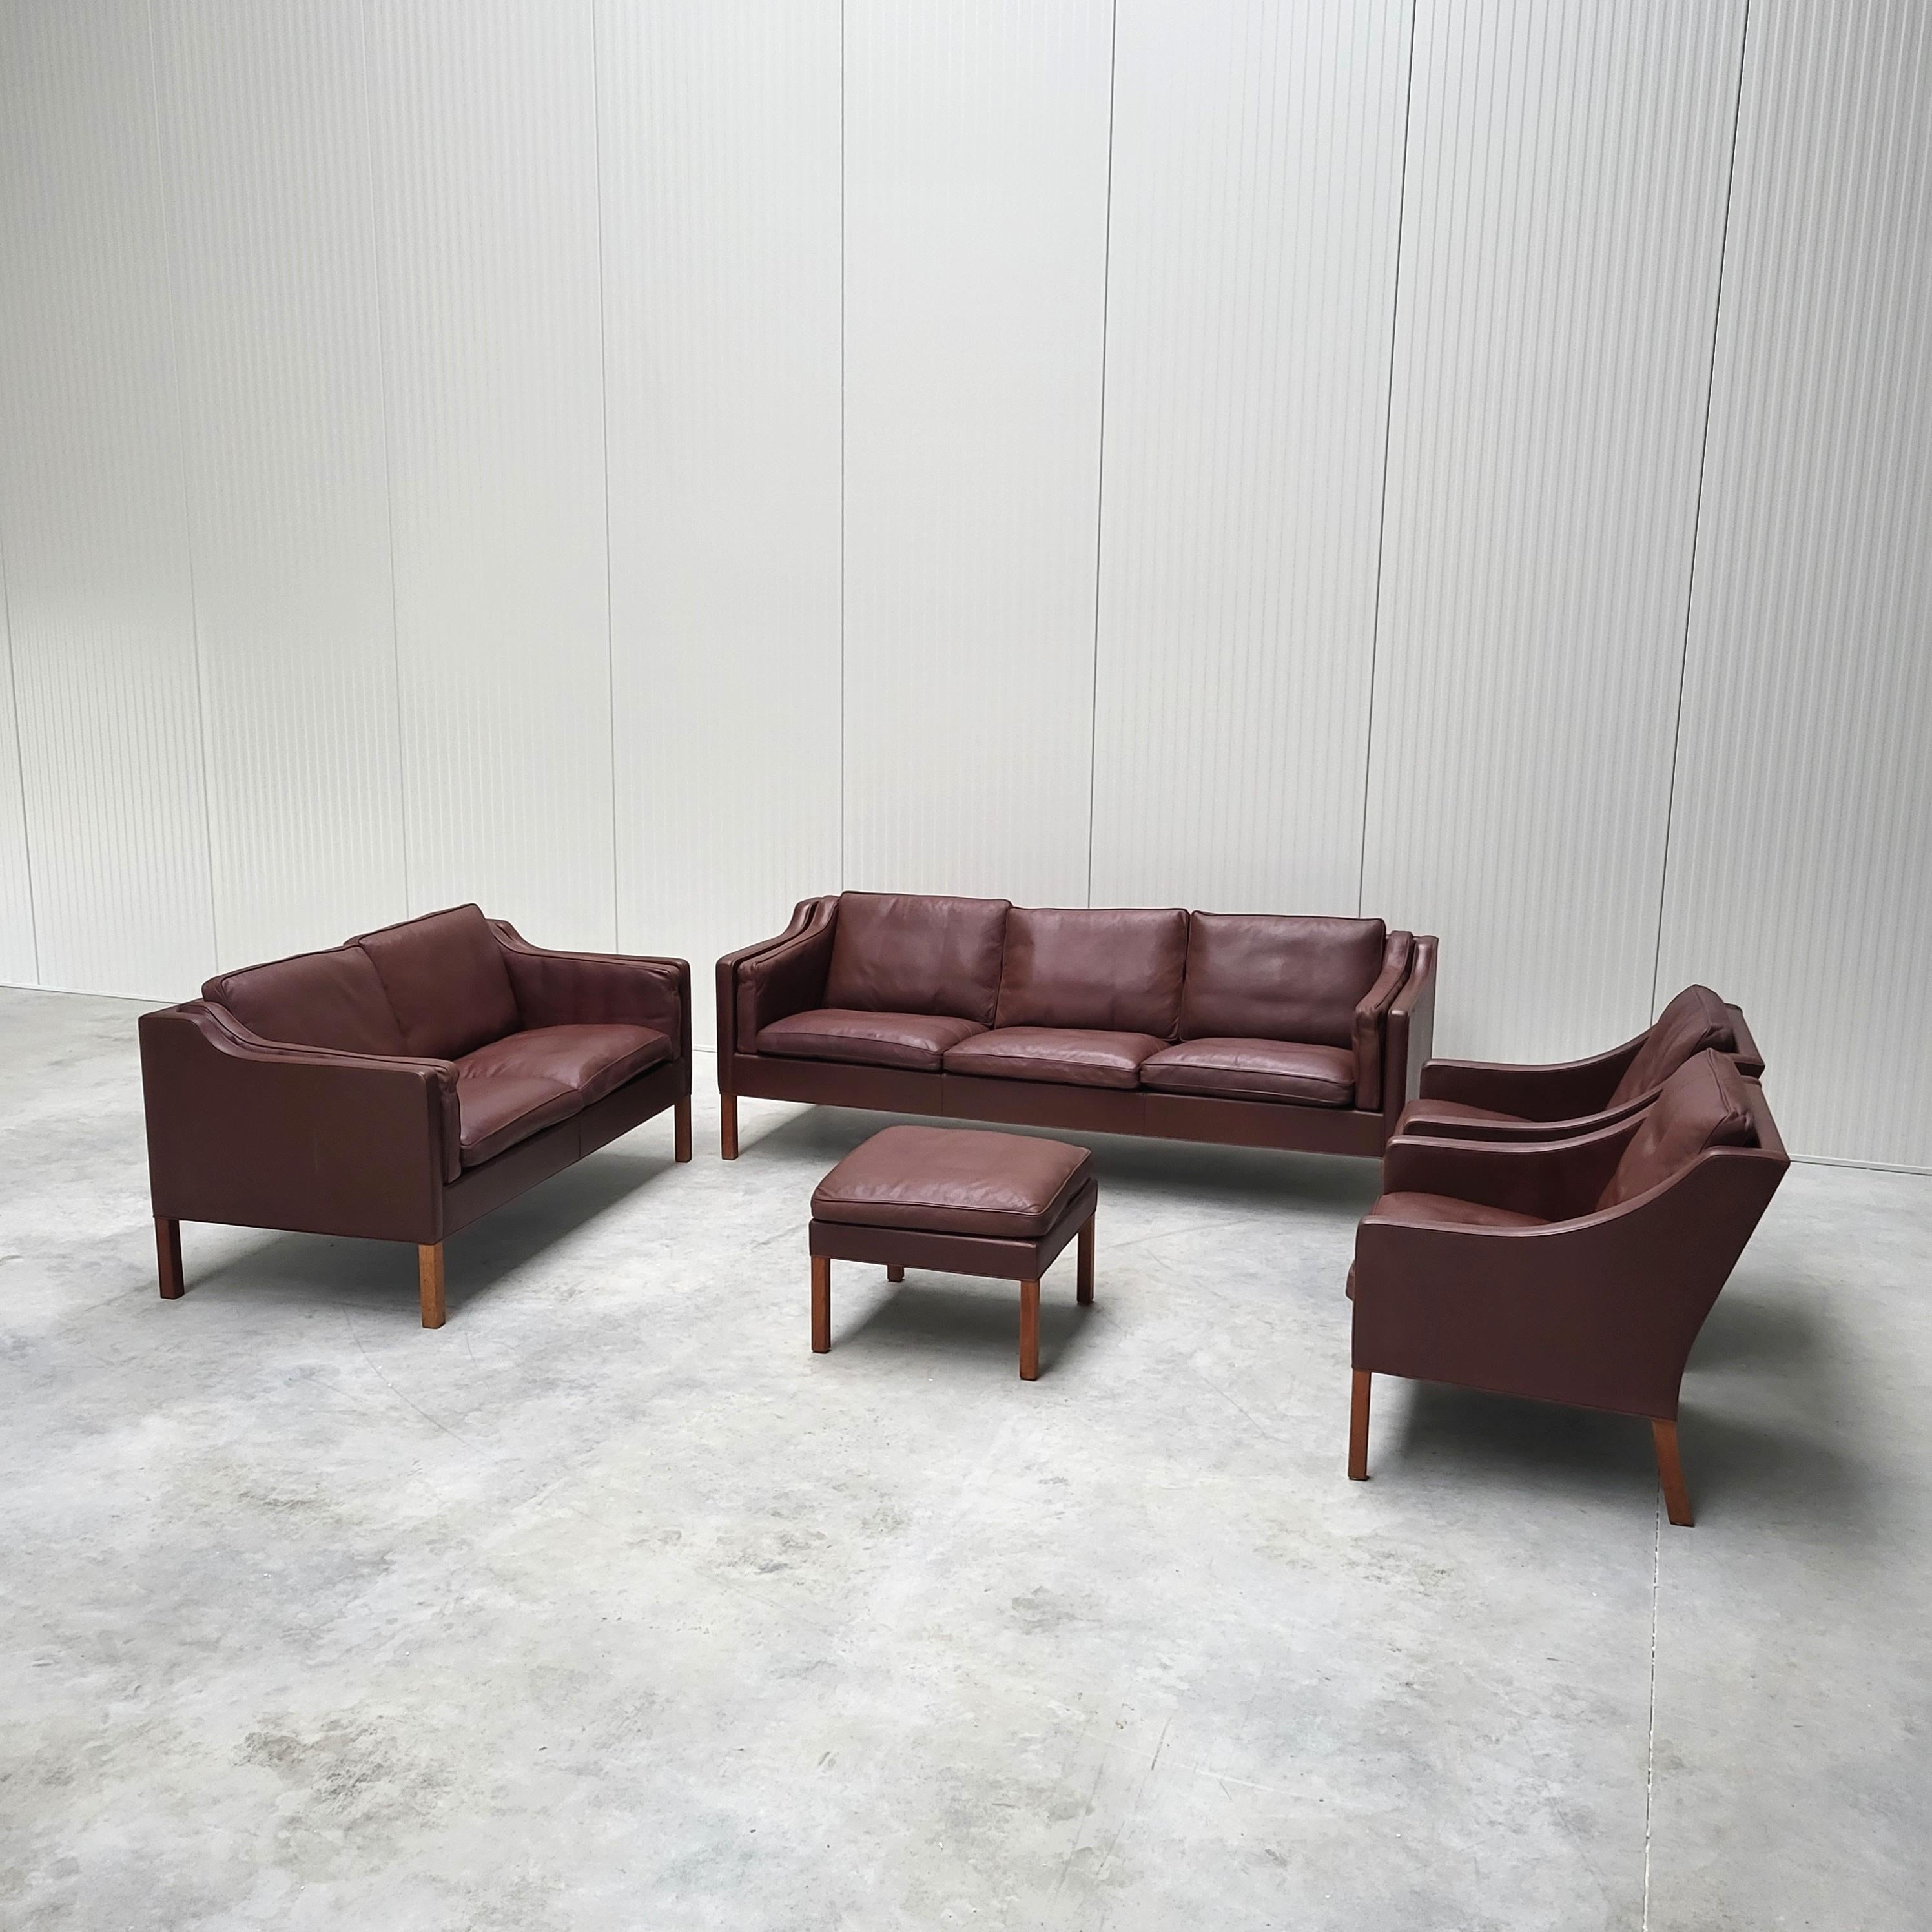 Amazing living room set 3-seater sofa mod. BM2213, 2-seater sofa mod. 2212, 2x club chairs mod. 2207 and ottoman mod. 2202 designed by Børge Mogensen and produced by Fredericia Stolefabrik in Denmark, 1962.

The set comes in a great original